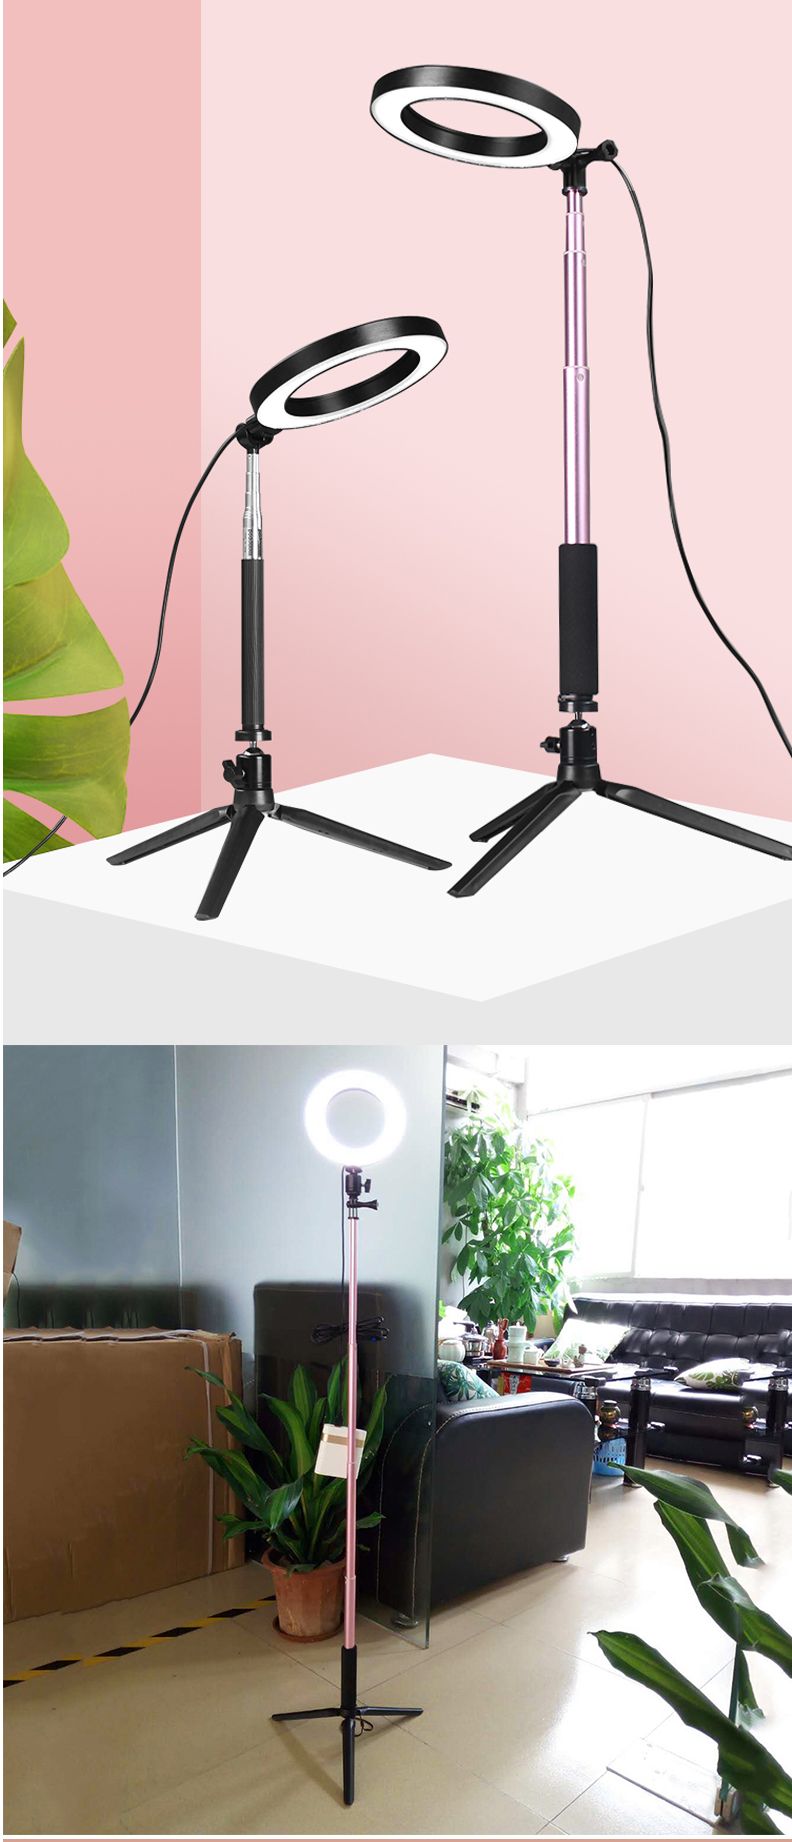 Yingnuost-16cm-3500-5500k-Video-Ring-Light-with-Extendable-Selfie-Stick-Stand-Tripod-Phone-Clip-for--1566683